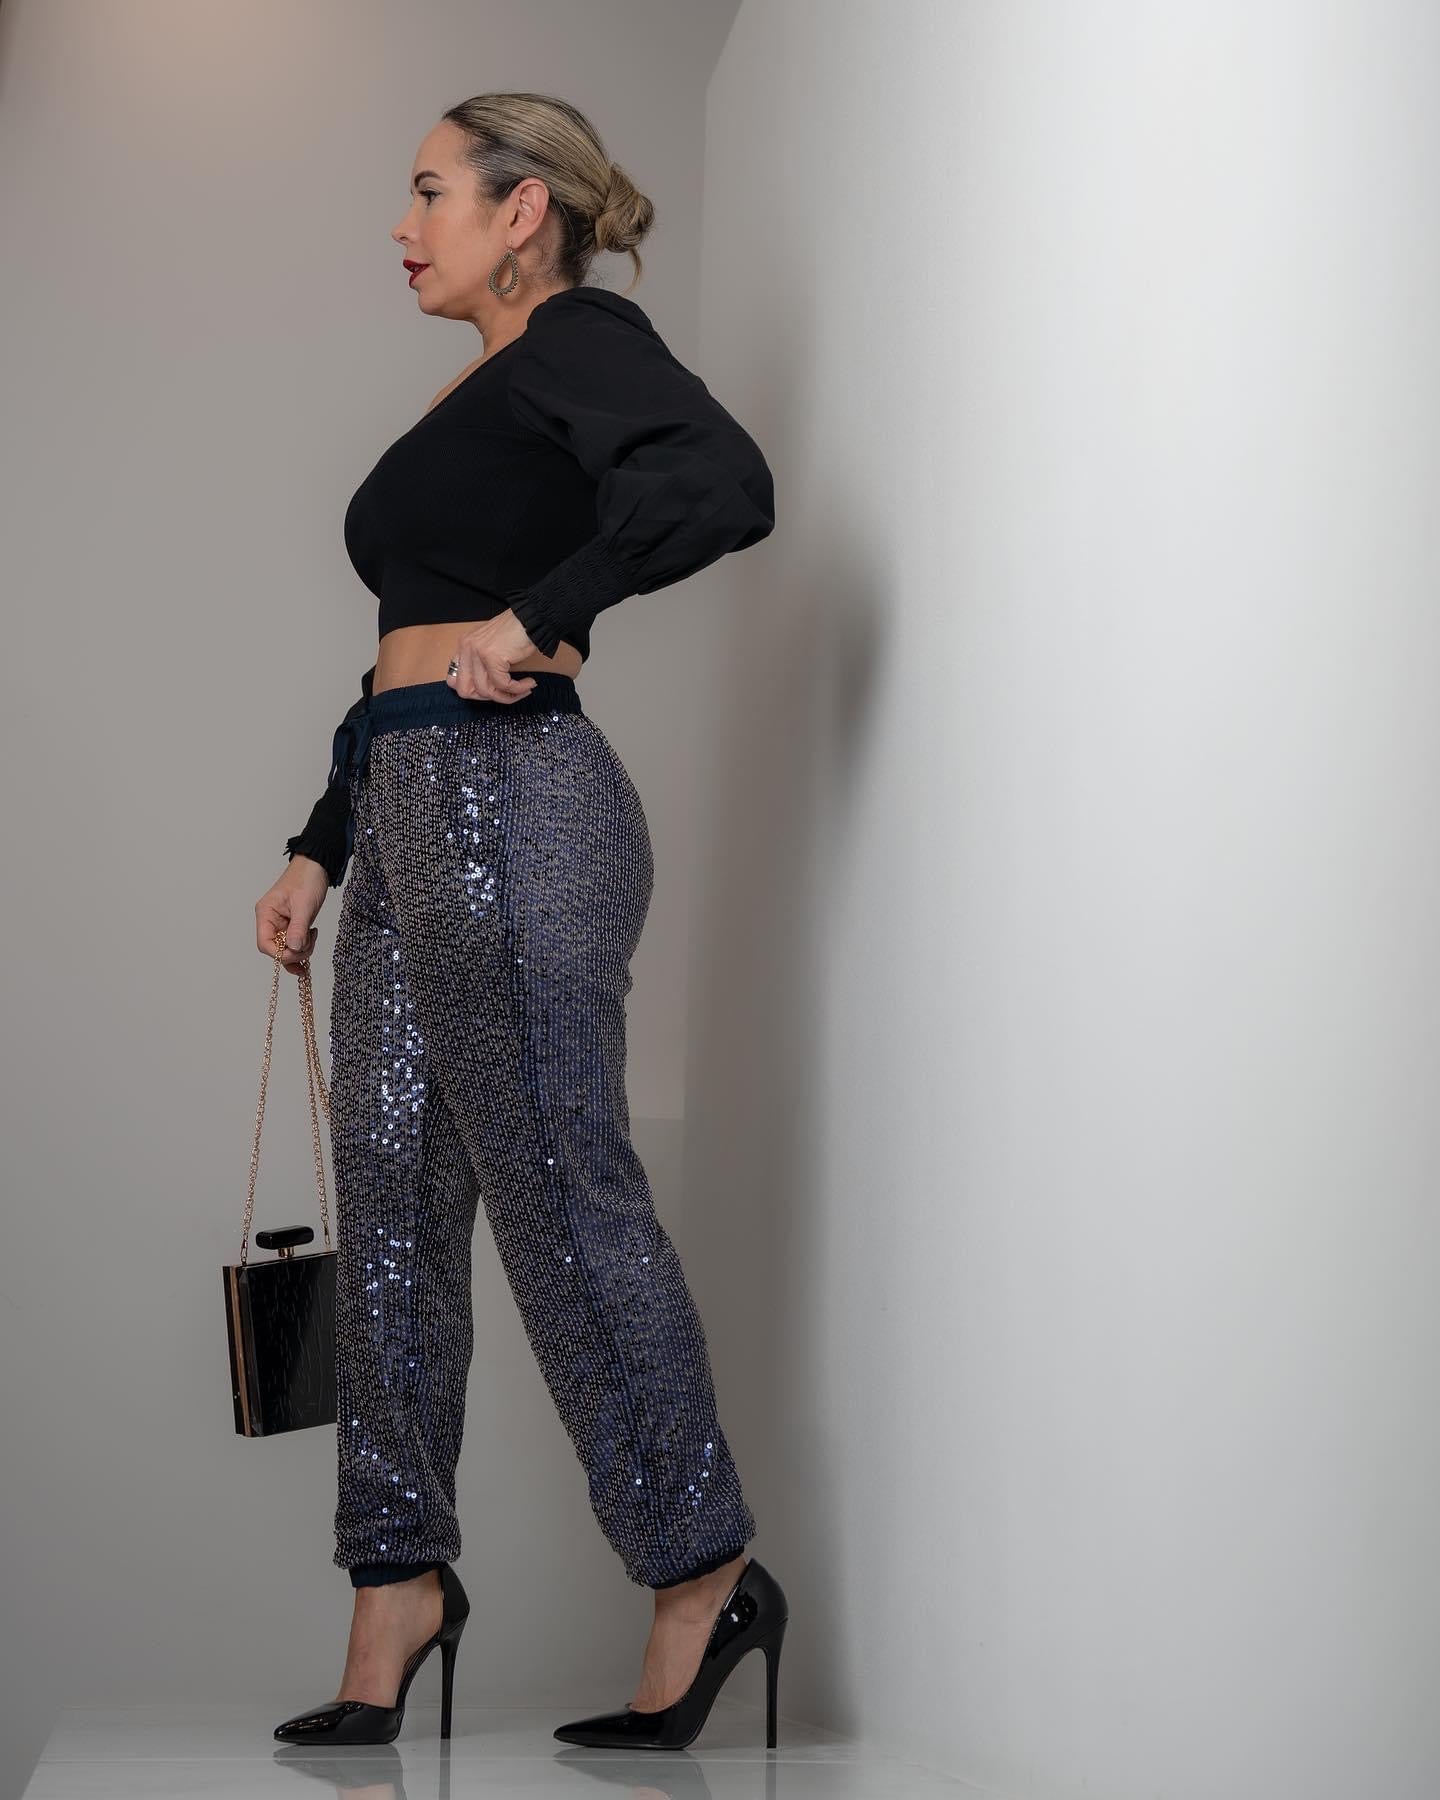 NAVY SEQUINS JOGGER PANTS WITH POCKETS